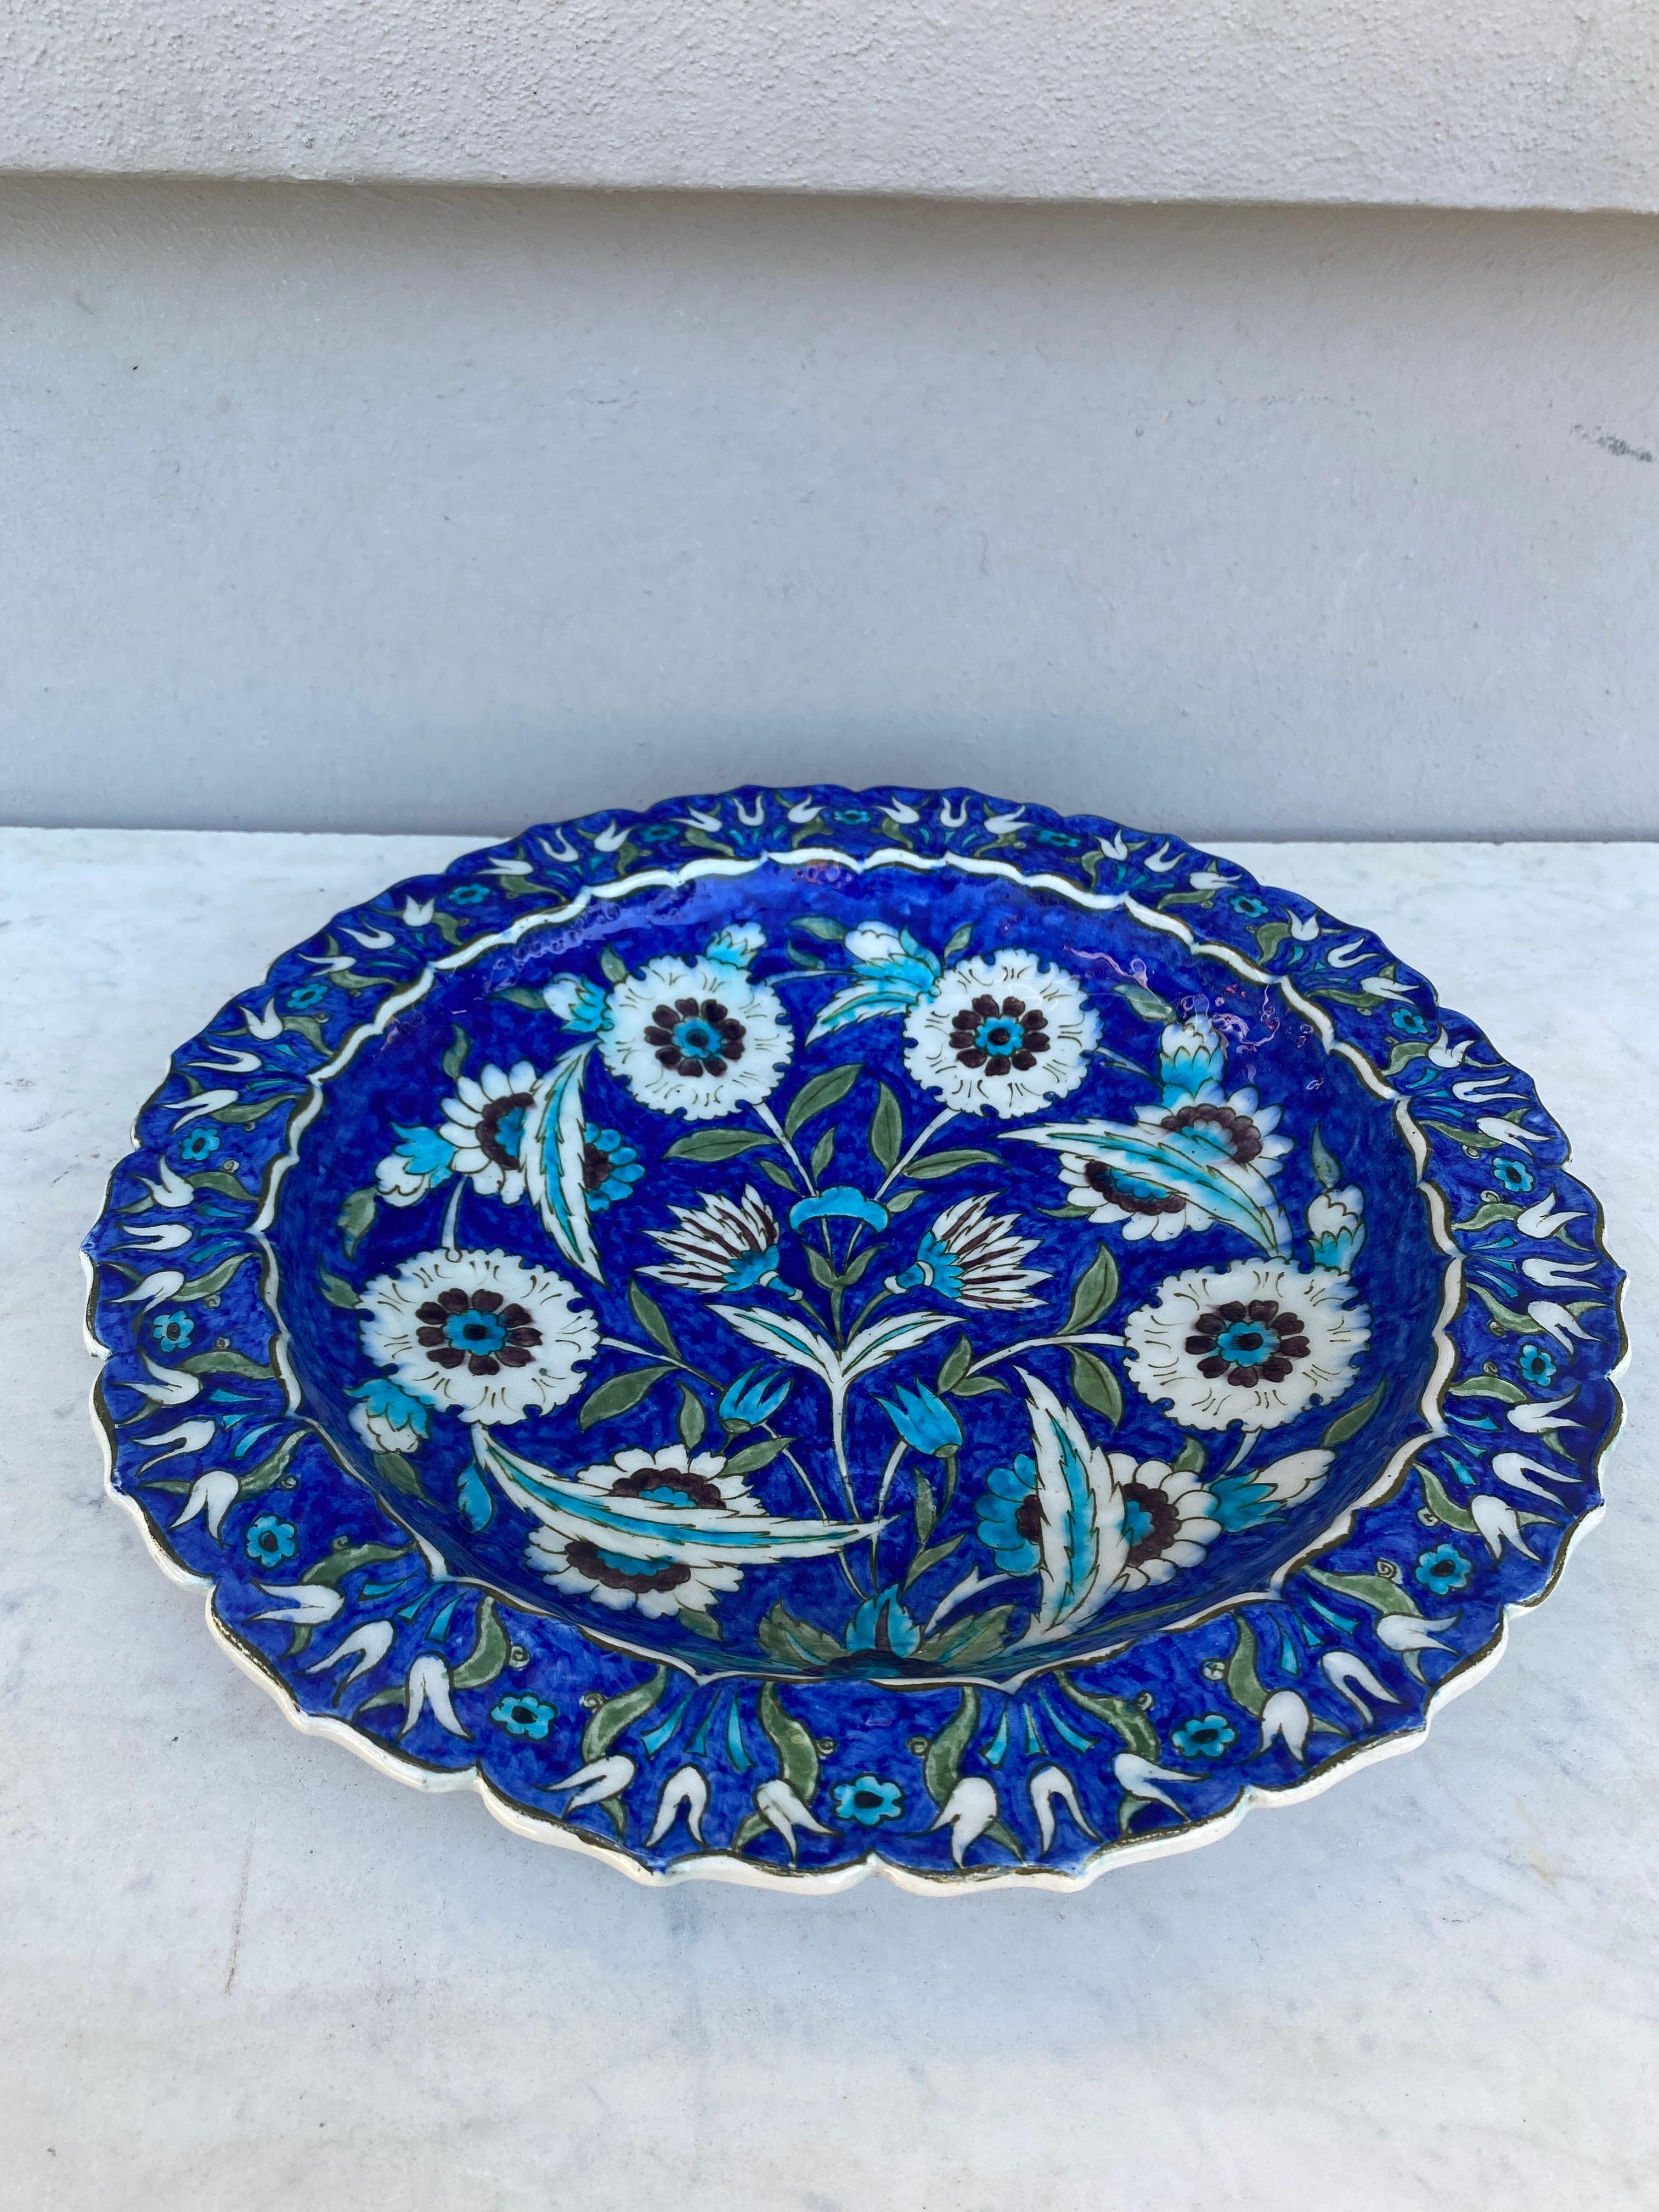 Large French Platter bowl signed Lachenal circa 1930.
Rare blue Iznik background with carnations.
Edmond Lachenal ( 1855 – 1948) was a French potter. He was a key figure in the French art pottery movement, and his works are held in many